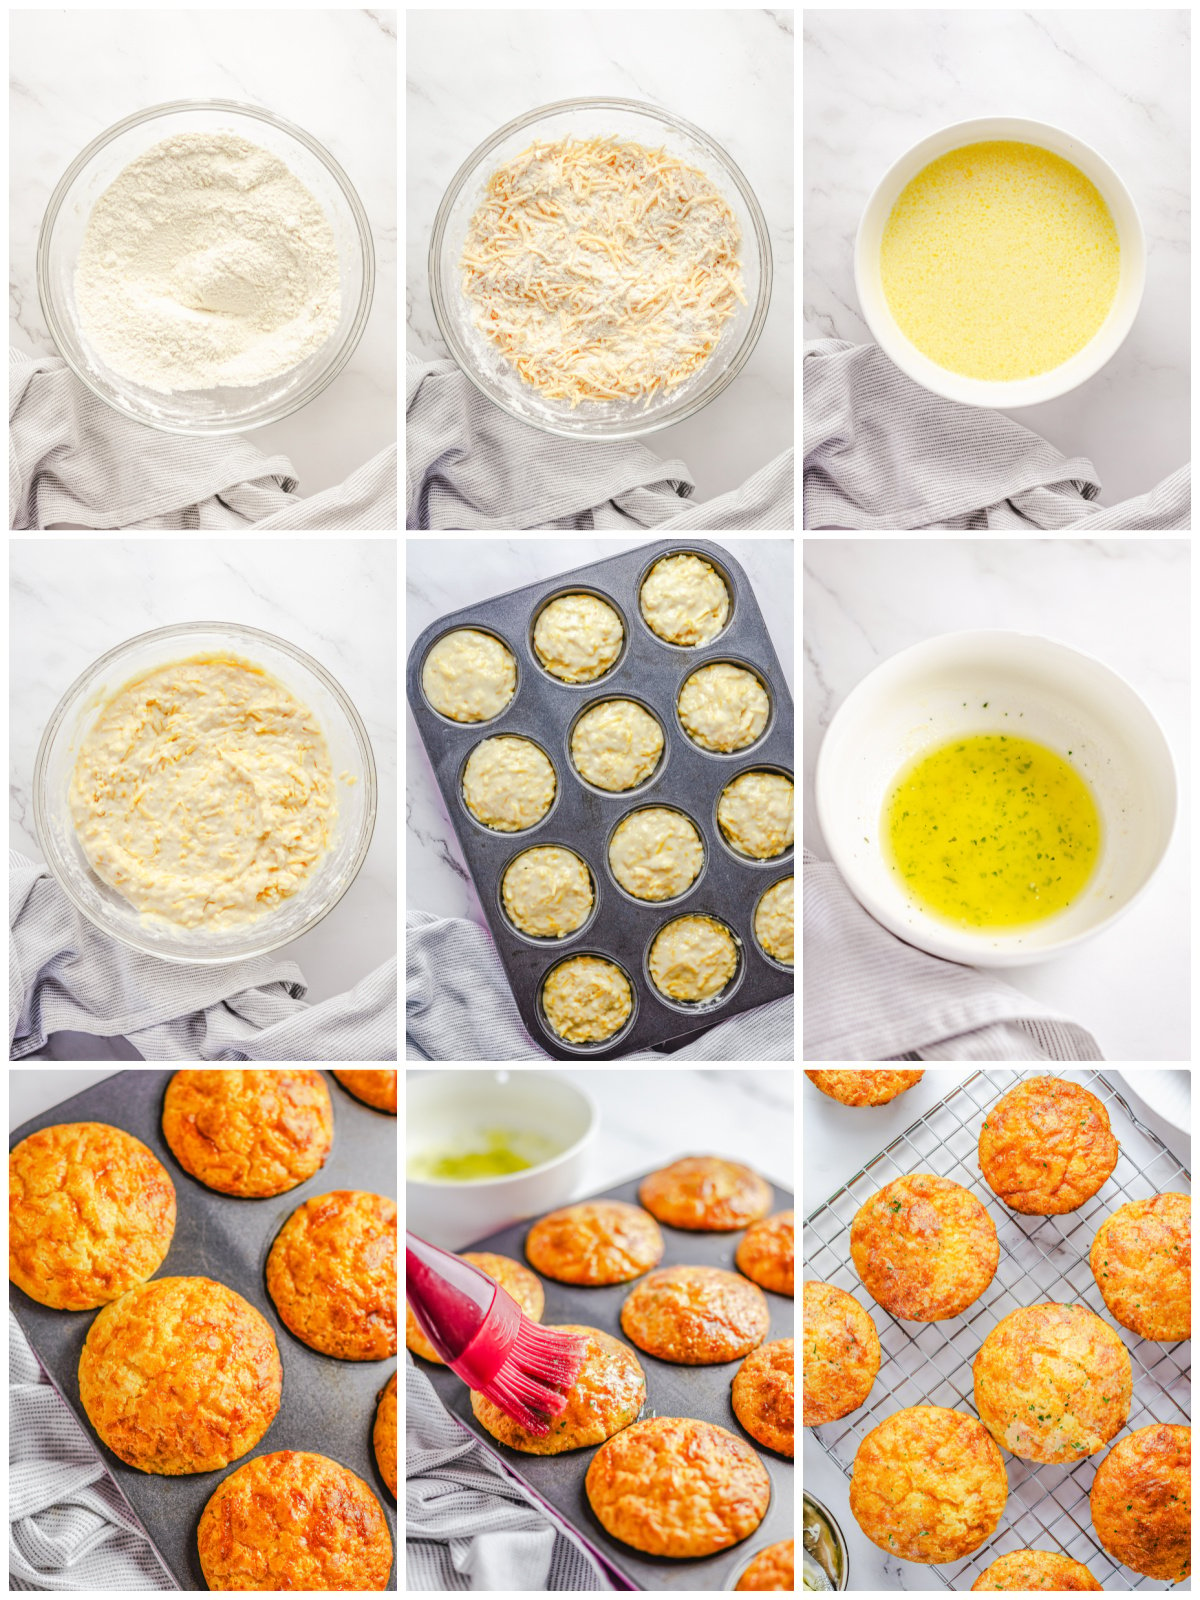 Step by step photos on how to make Garlic Cheese Muffins.